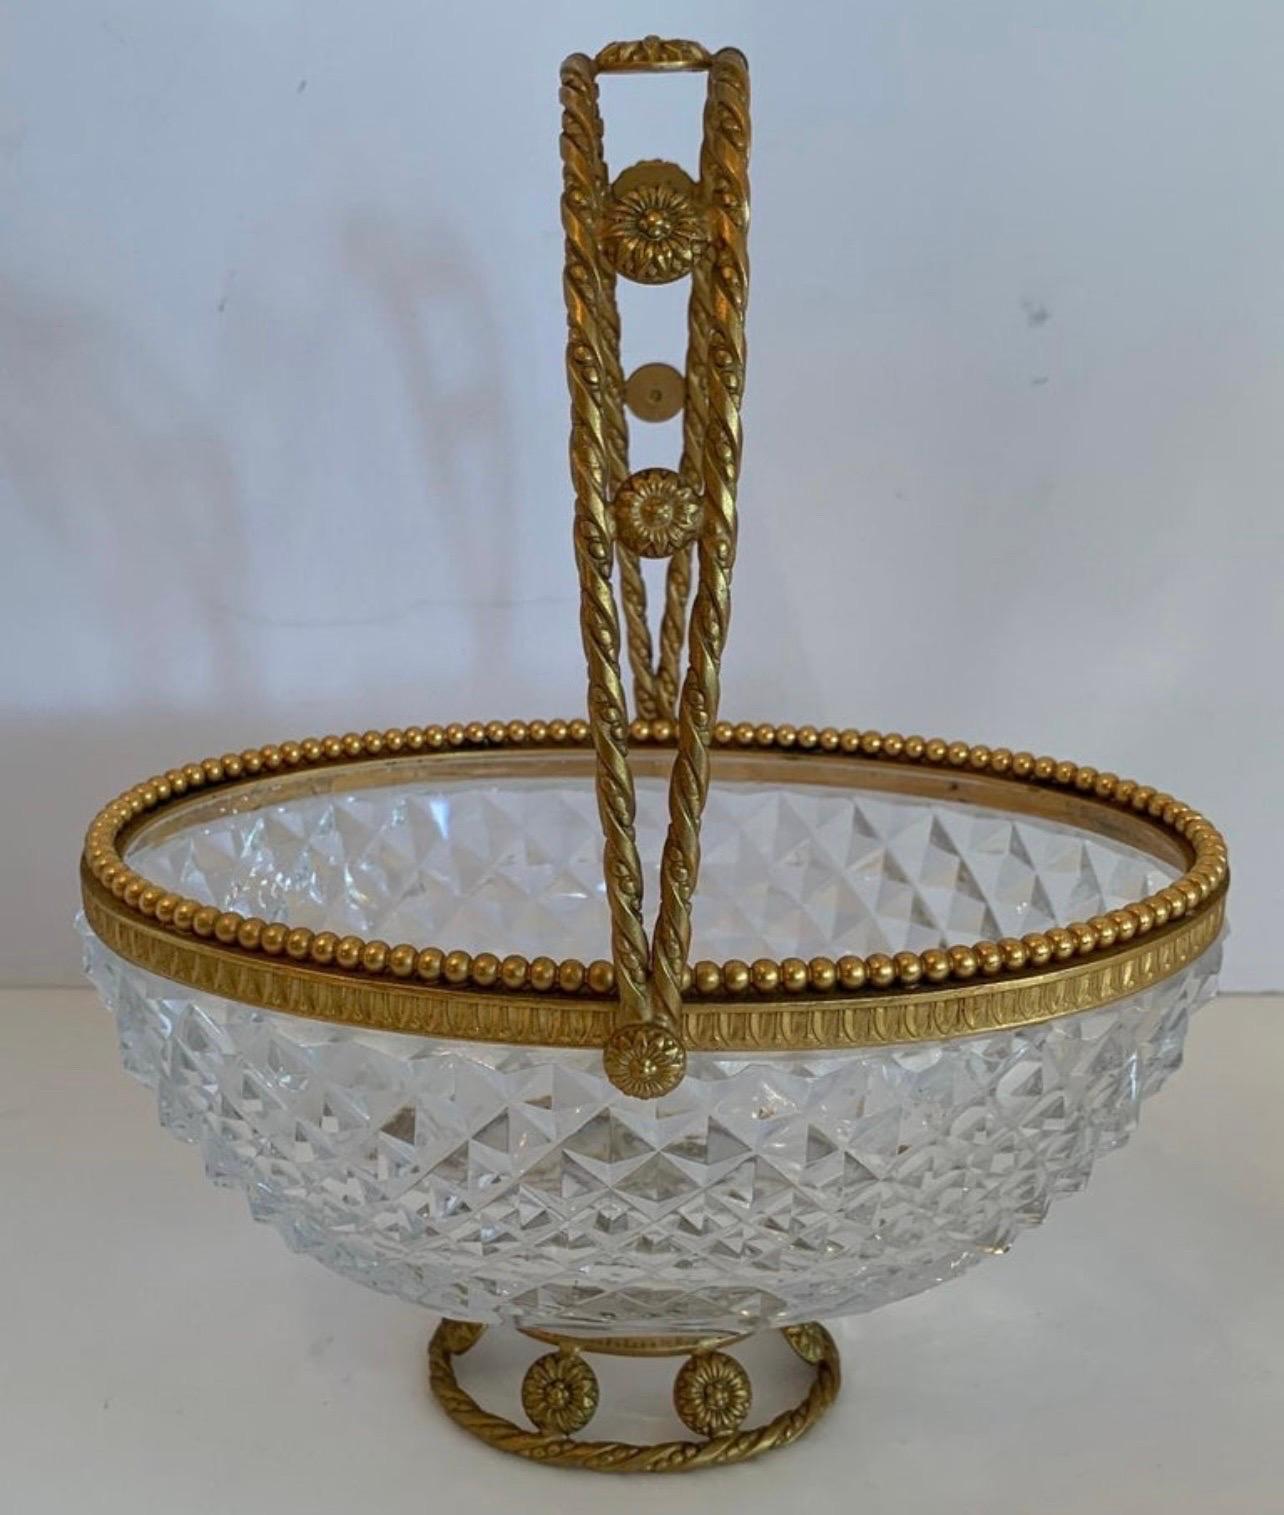 A Wonderful French Gilt Dore Bronze & Diamond Cut Crystal Oval Basket Centerpiece Bowl With Pierced Movable Handle, In The Manner Of Baccarat 